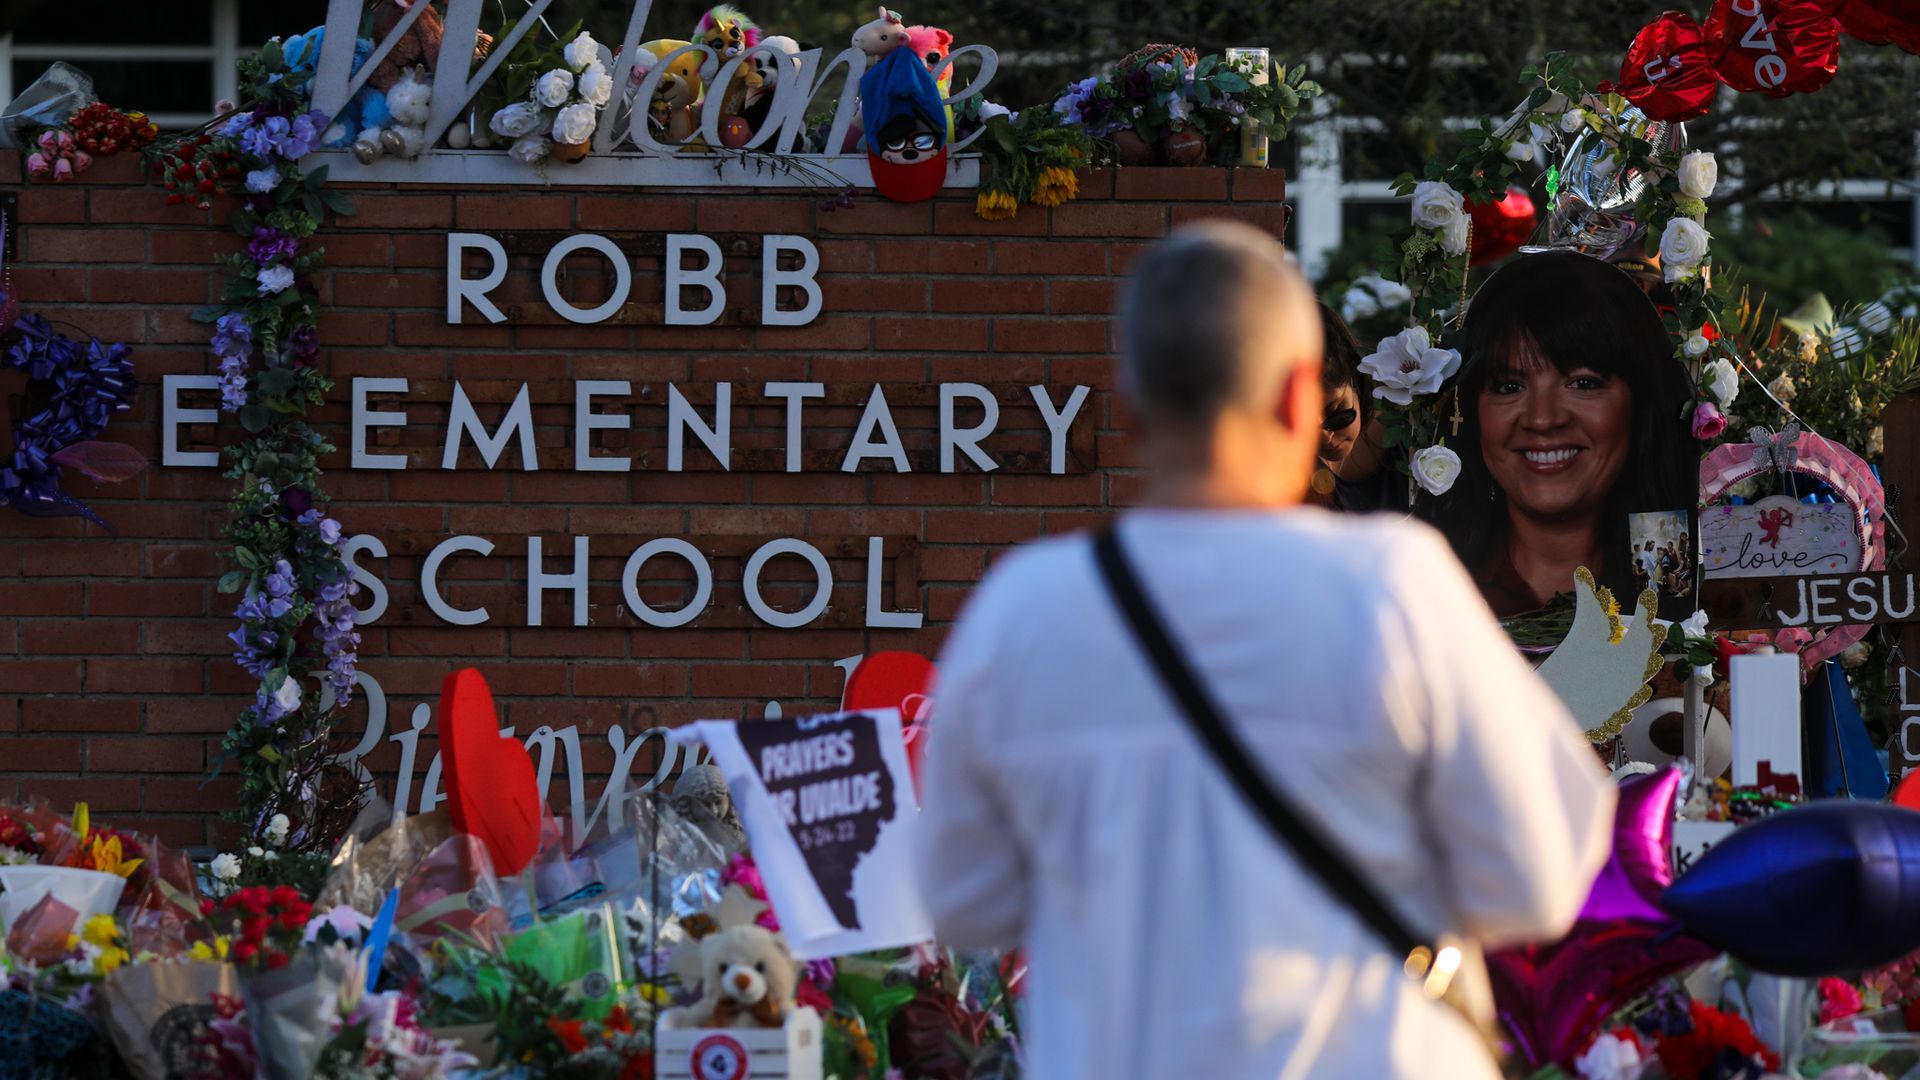 Photo of a person standing in front of a brick sign that says "Robb Elementary School" and is shrouded by flowers and signs